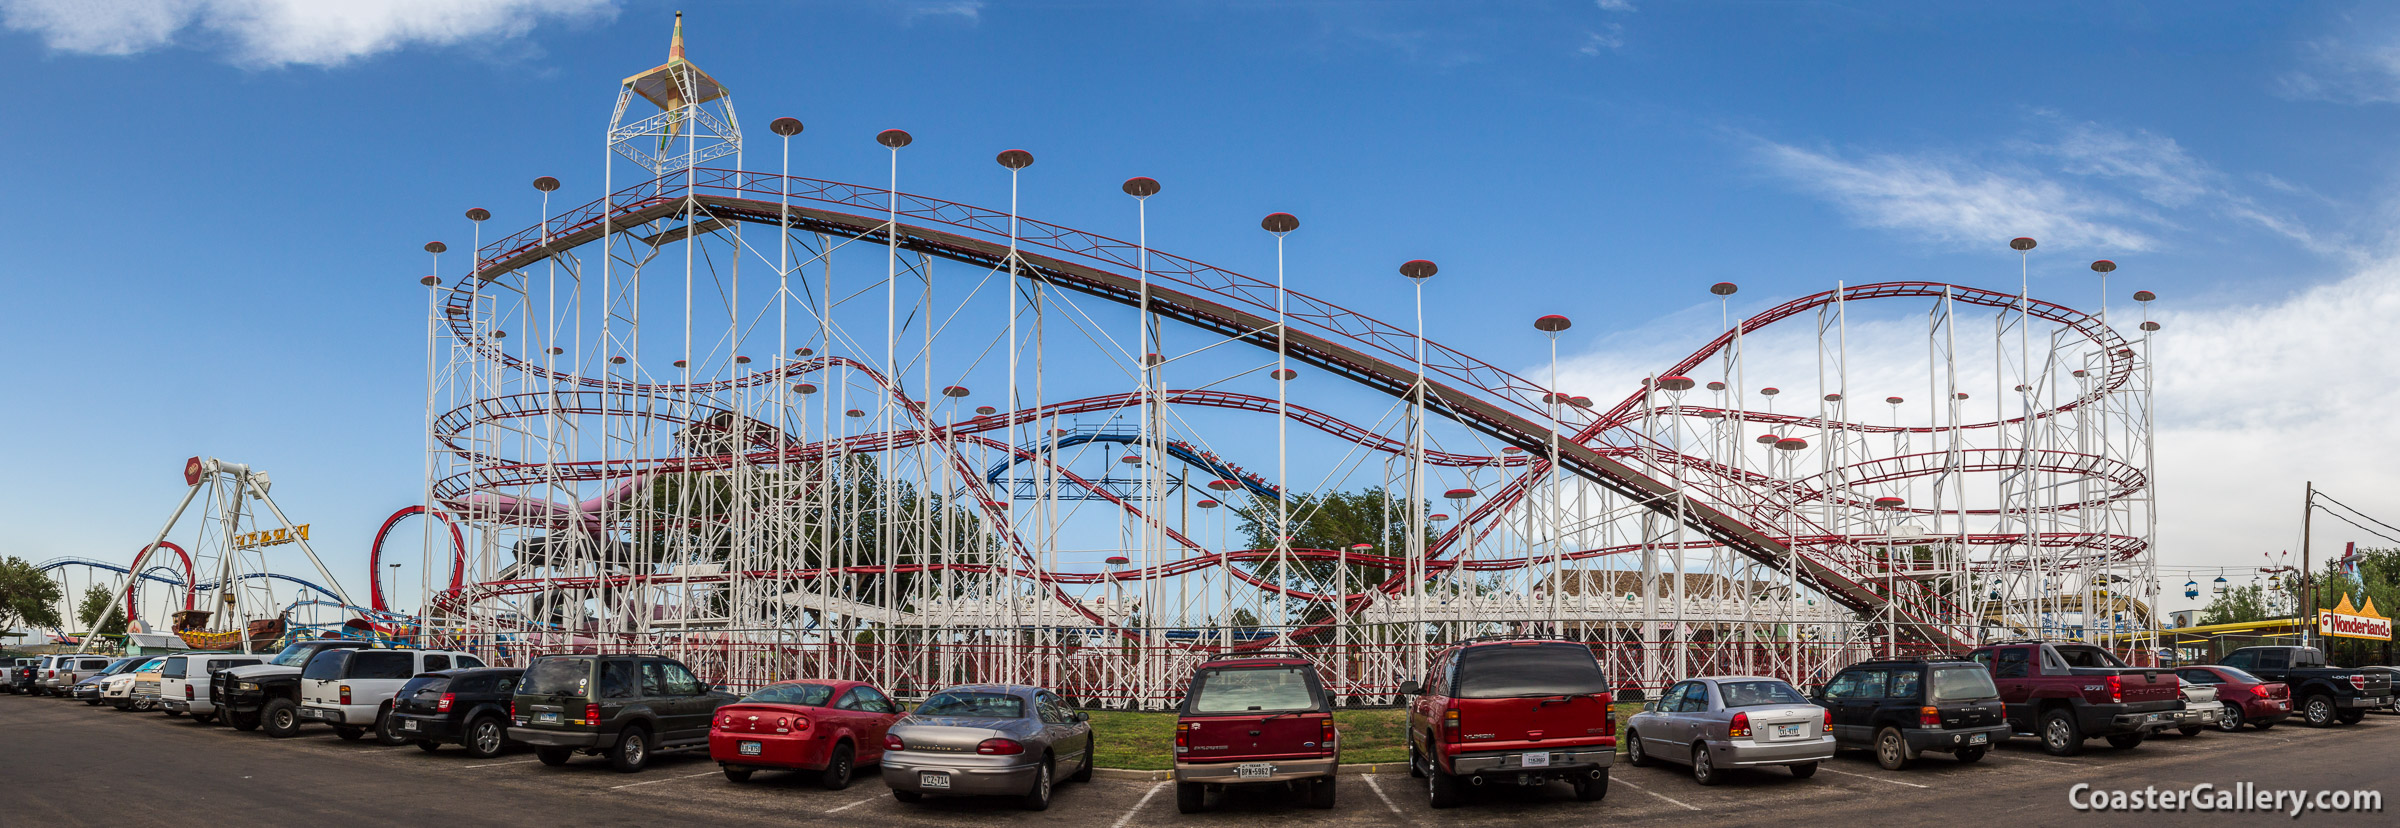 Panorama picture of the Mouse Trap Coaster at Wonderland Park